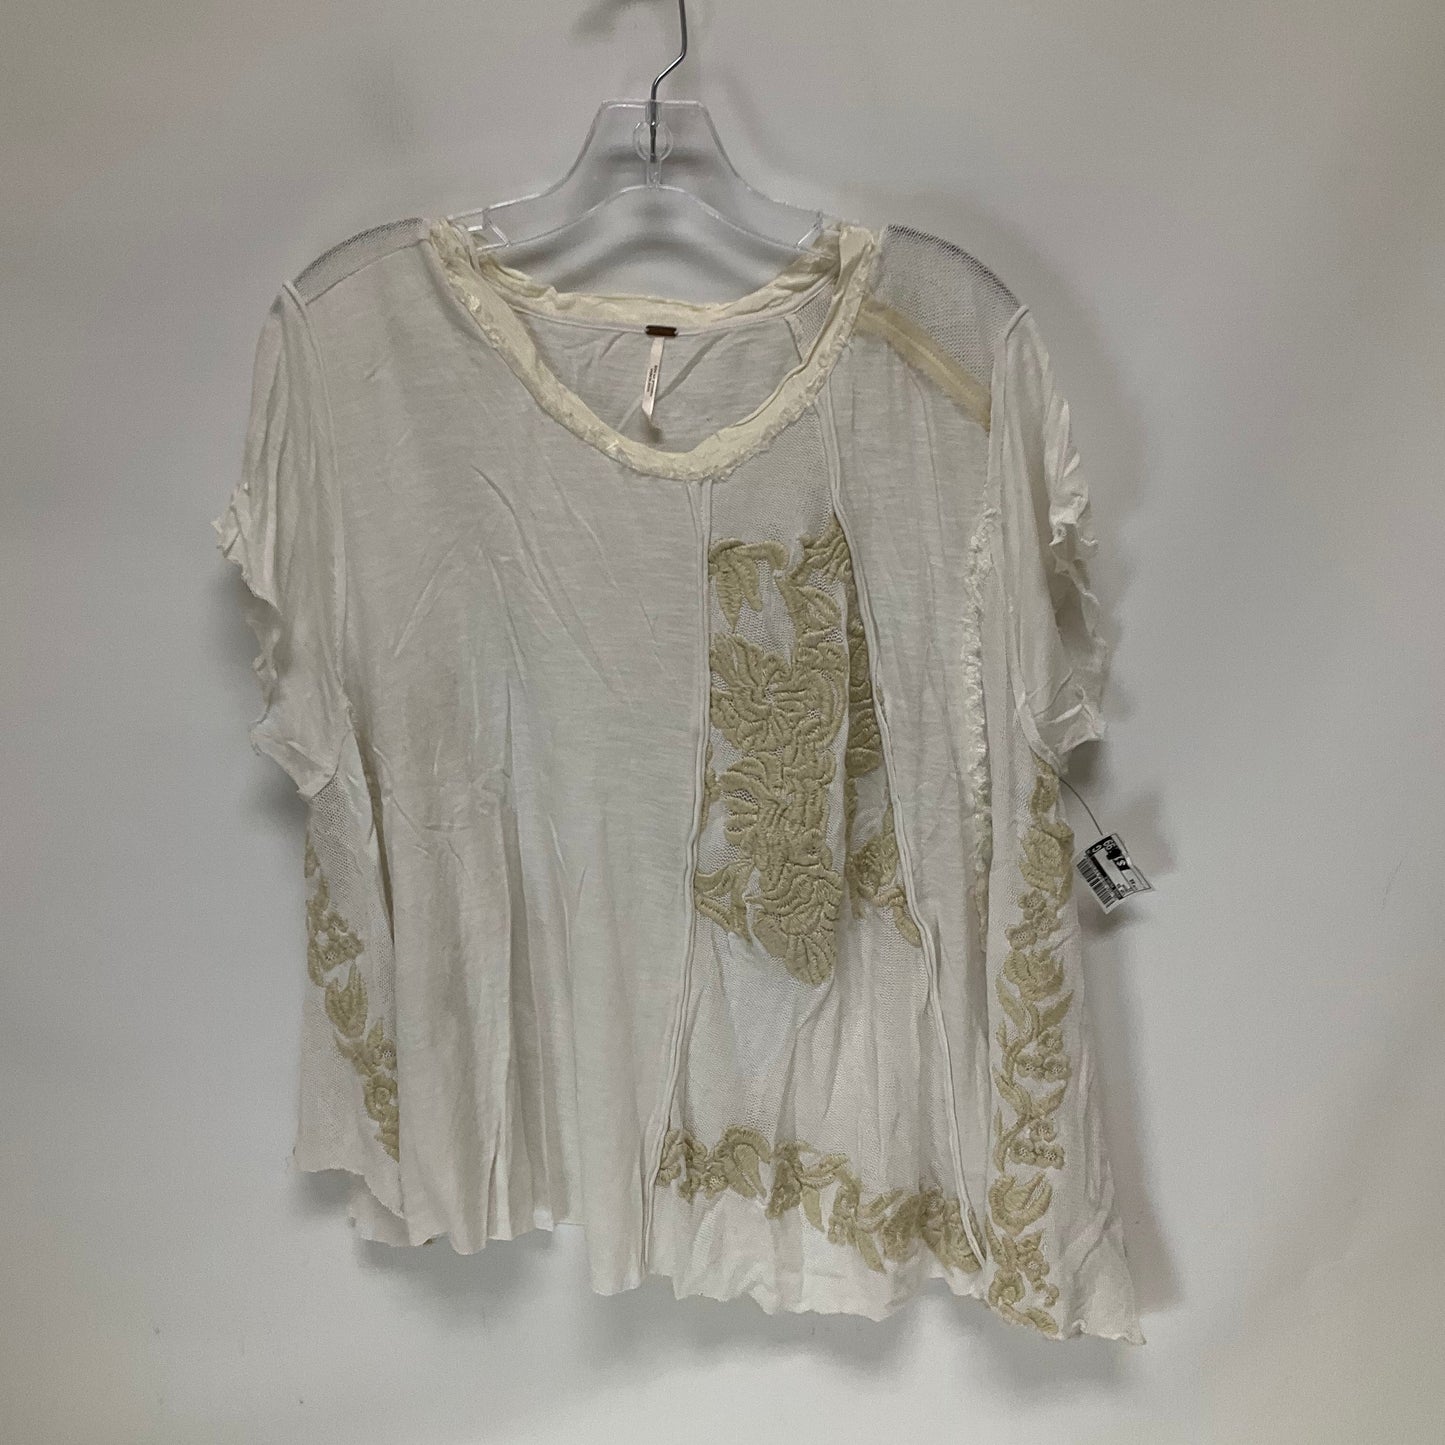 Cream Top Short Sleeve Free People, Size Xs